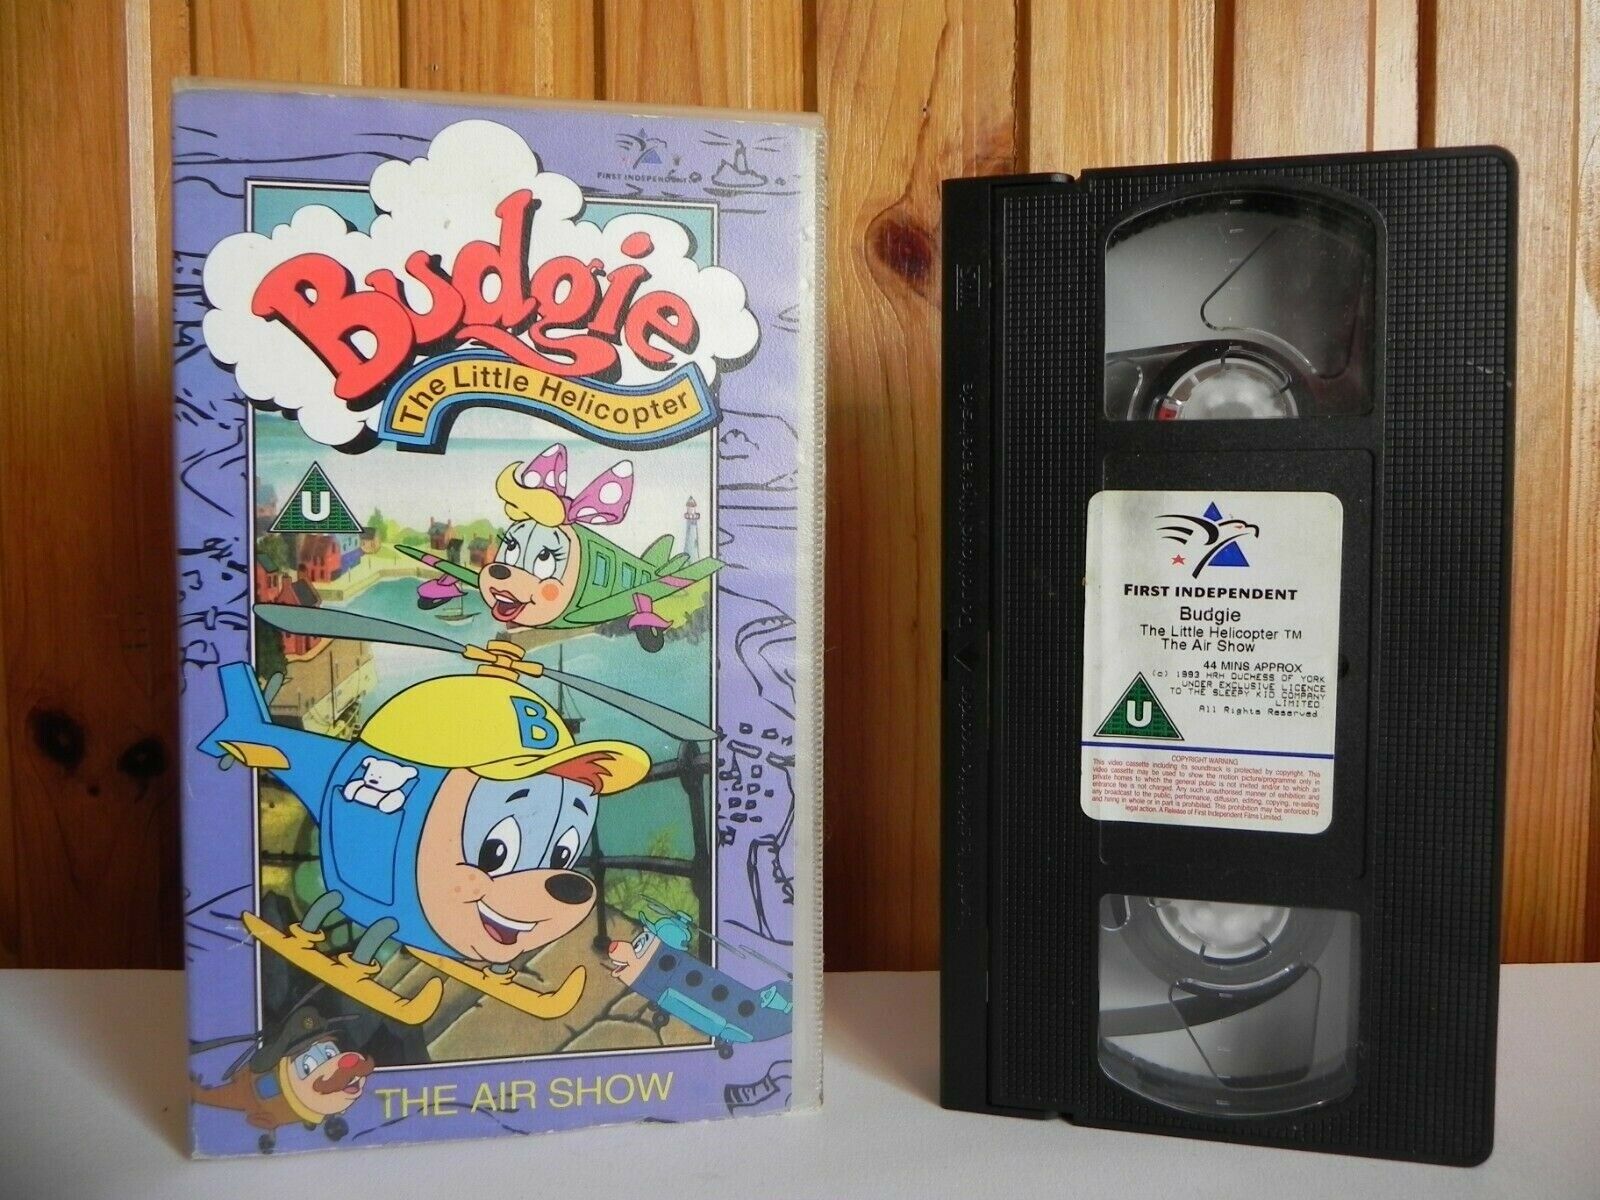 Budgie The Little Helicopter - Animated - Adventure - Fun - Children's - Pal VHS-